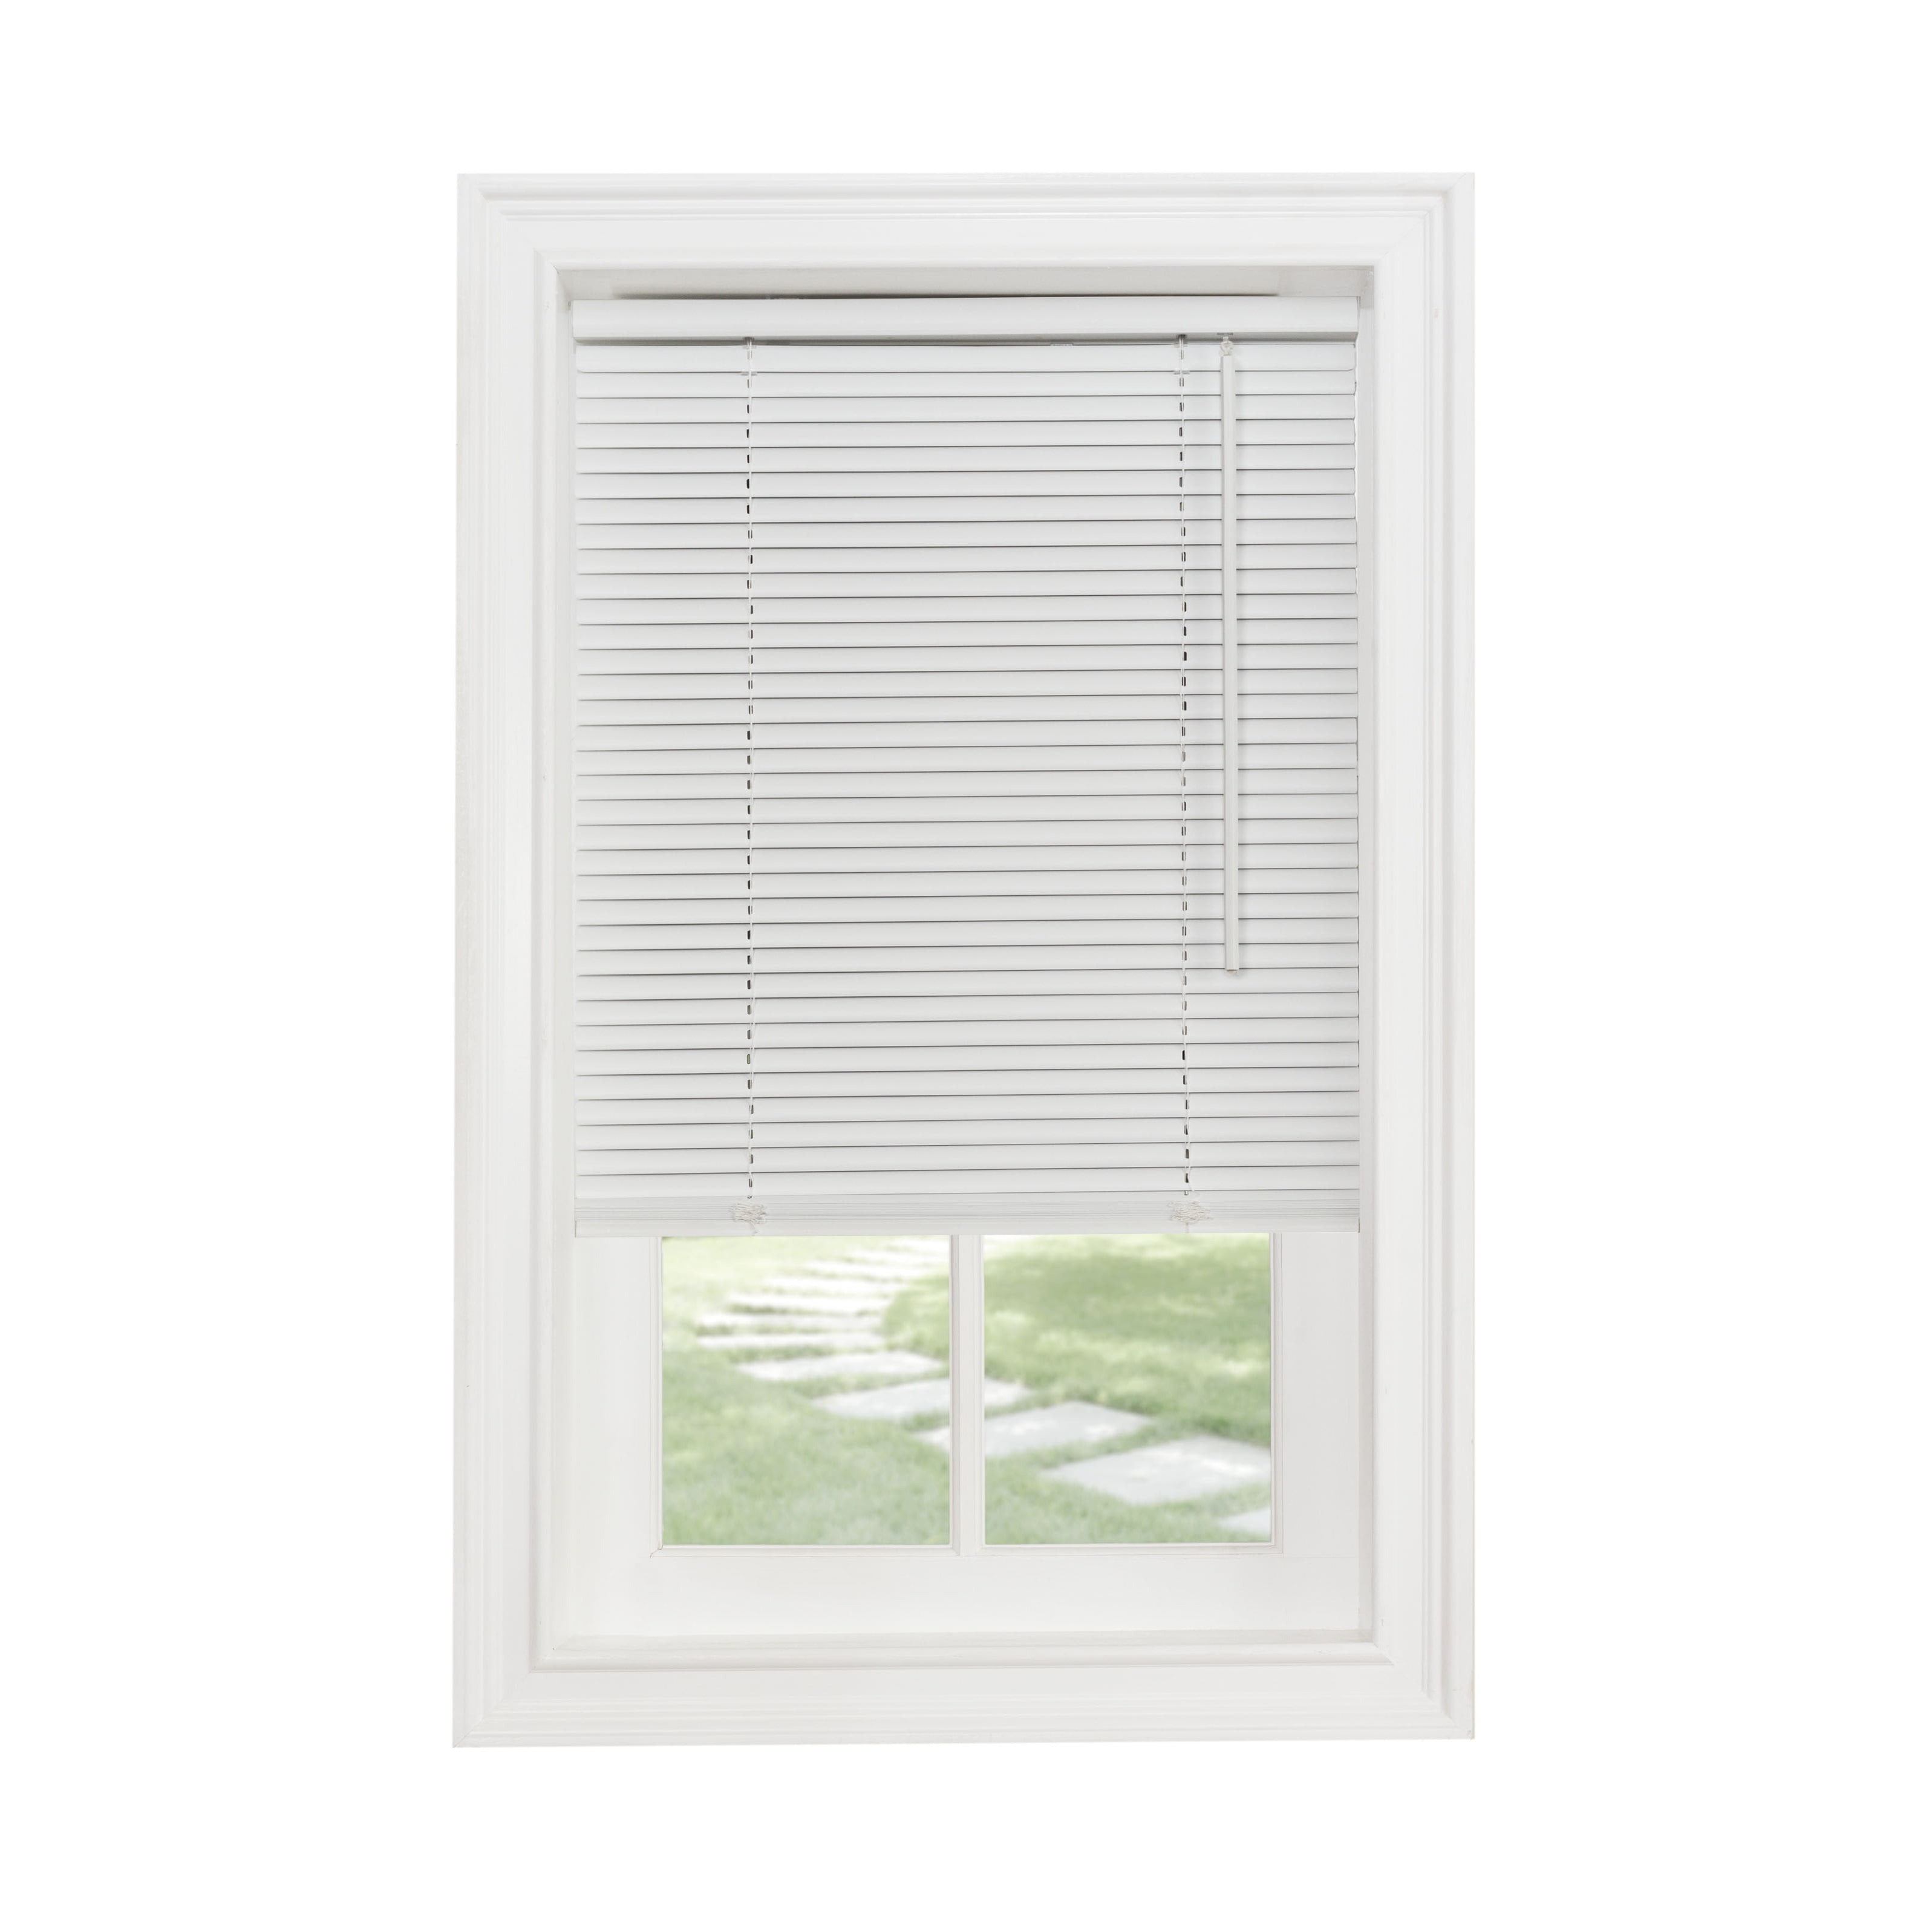 White, 24 x 72 Inch Acholo Blackout Roller Shades Cordless Window Blinds and Room Darkening Shades for Home /& Windows